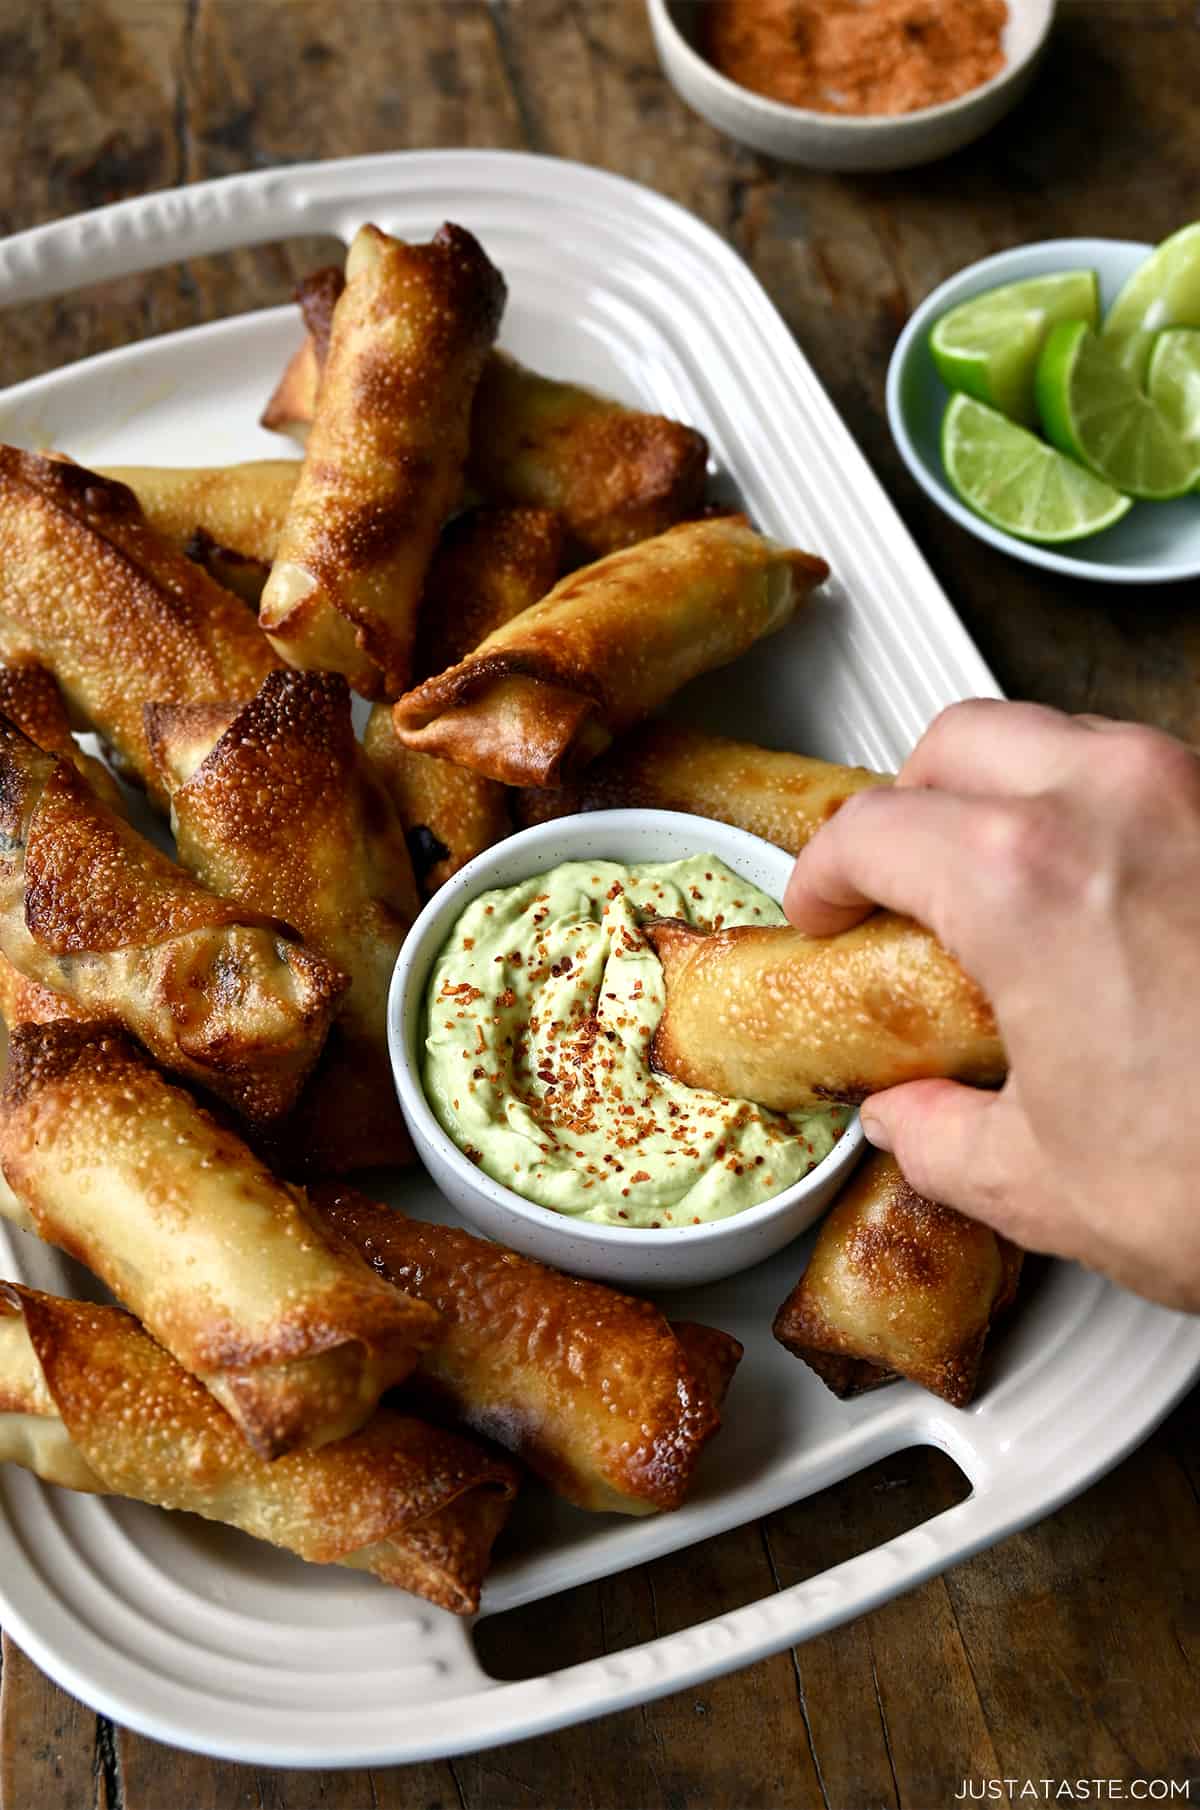 A hand dipping an egg roll into avocado dip topped with tajin